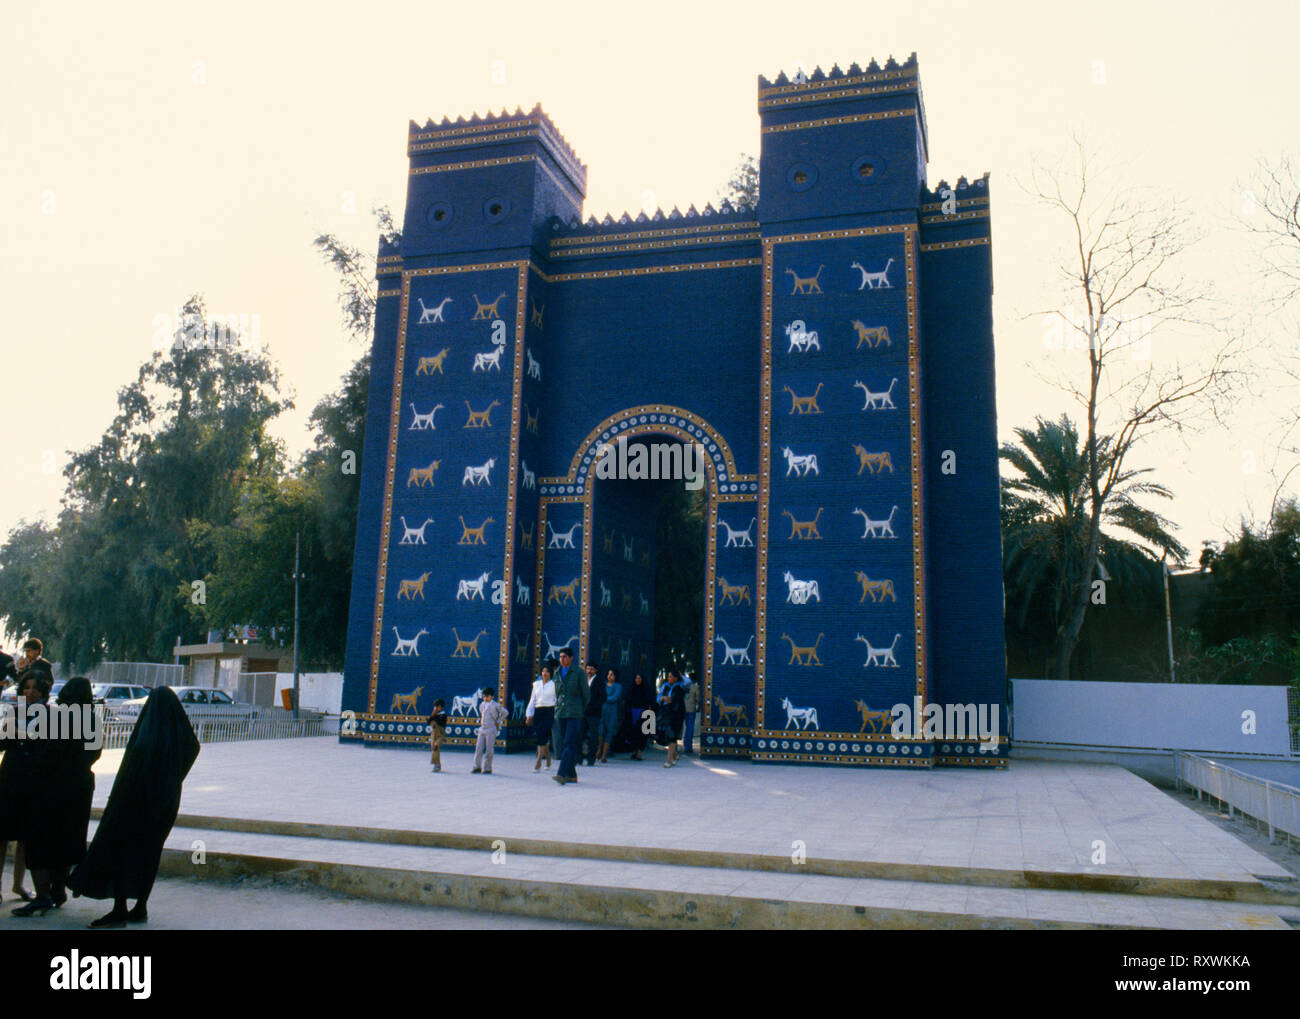 Half-size replica of the Ishtar Gate at Babylon (Bab-Il, Babel), 90km SW of Baghdad, Iraq, photographed in March 1983 during the Iran-Iraq War. Stock Photo